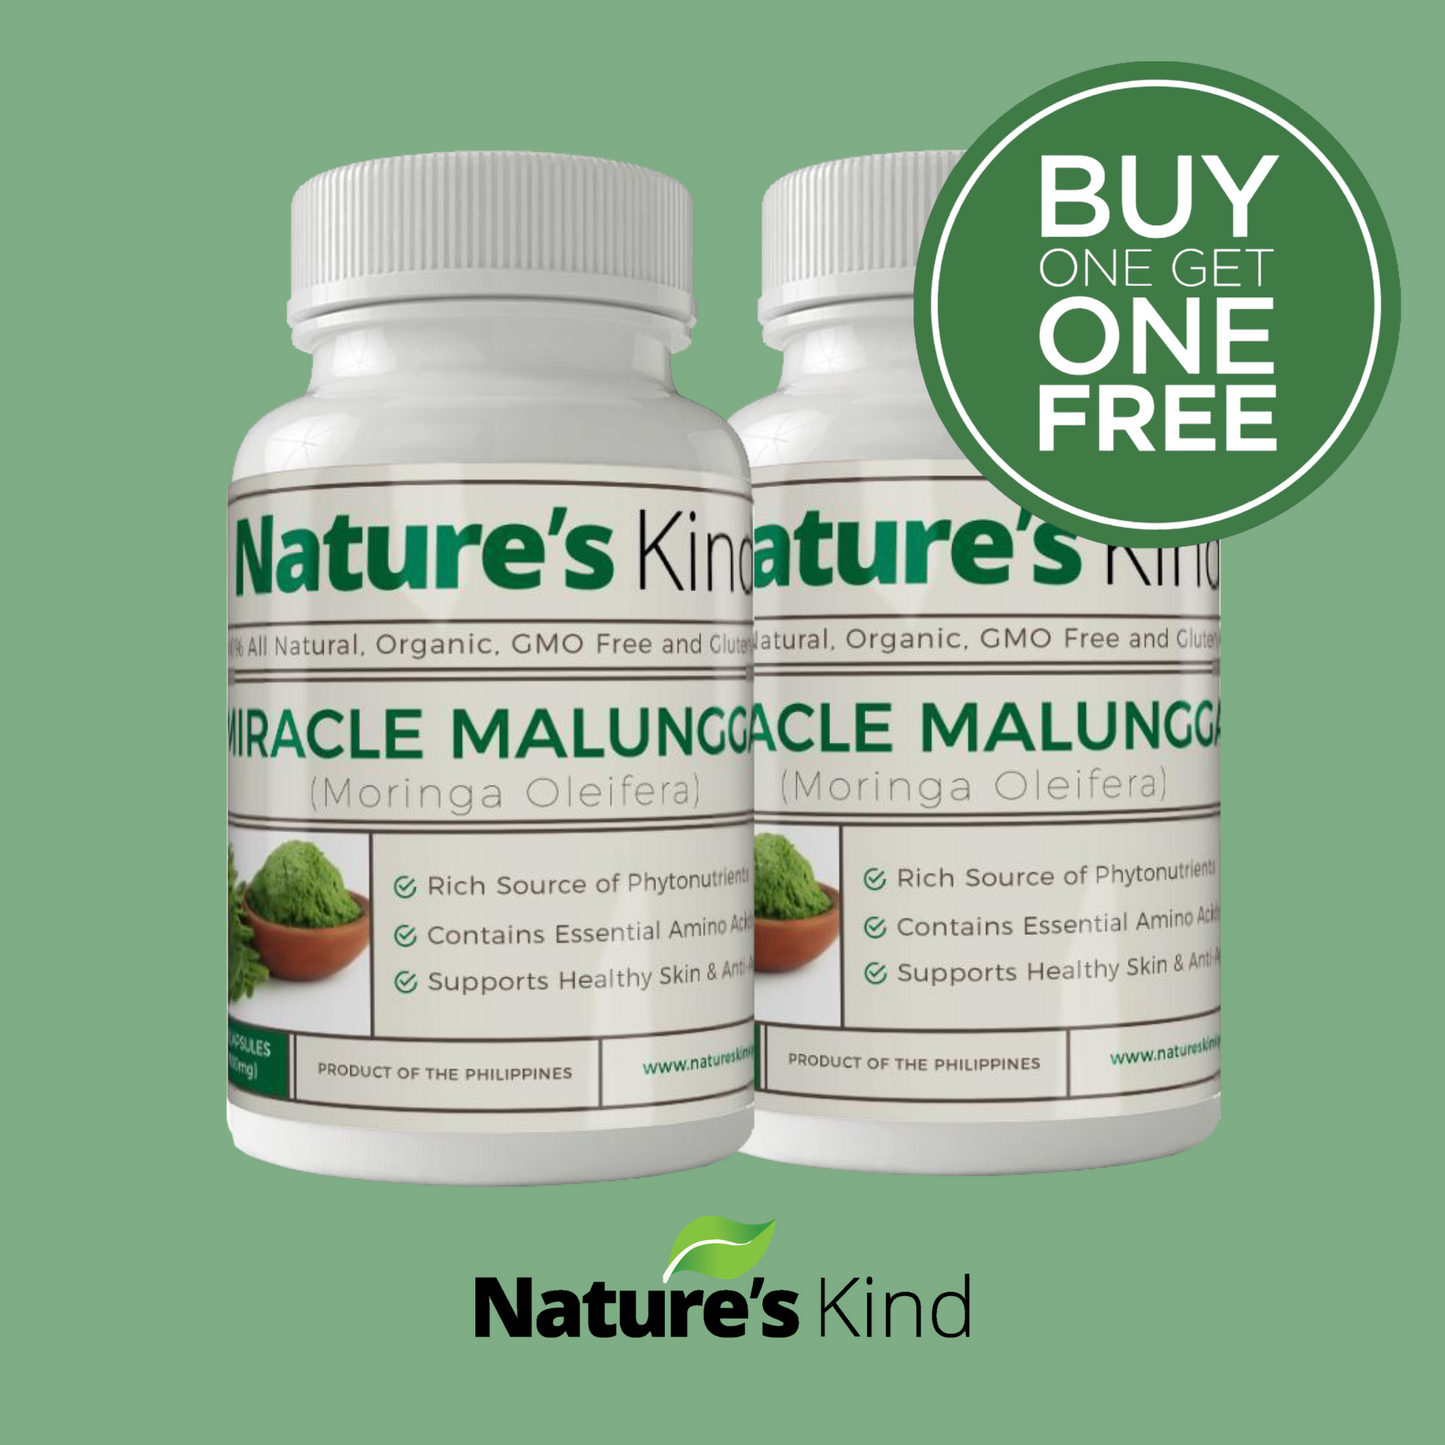 Organic Miracle Malunggay Capsules - Buy One Take One Promo!